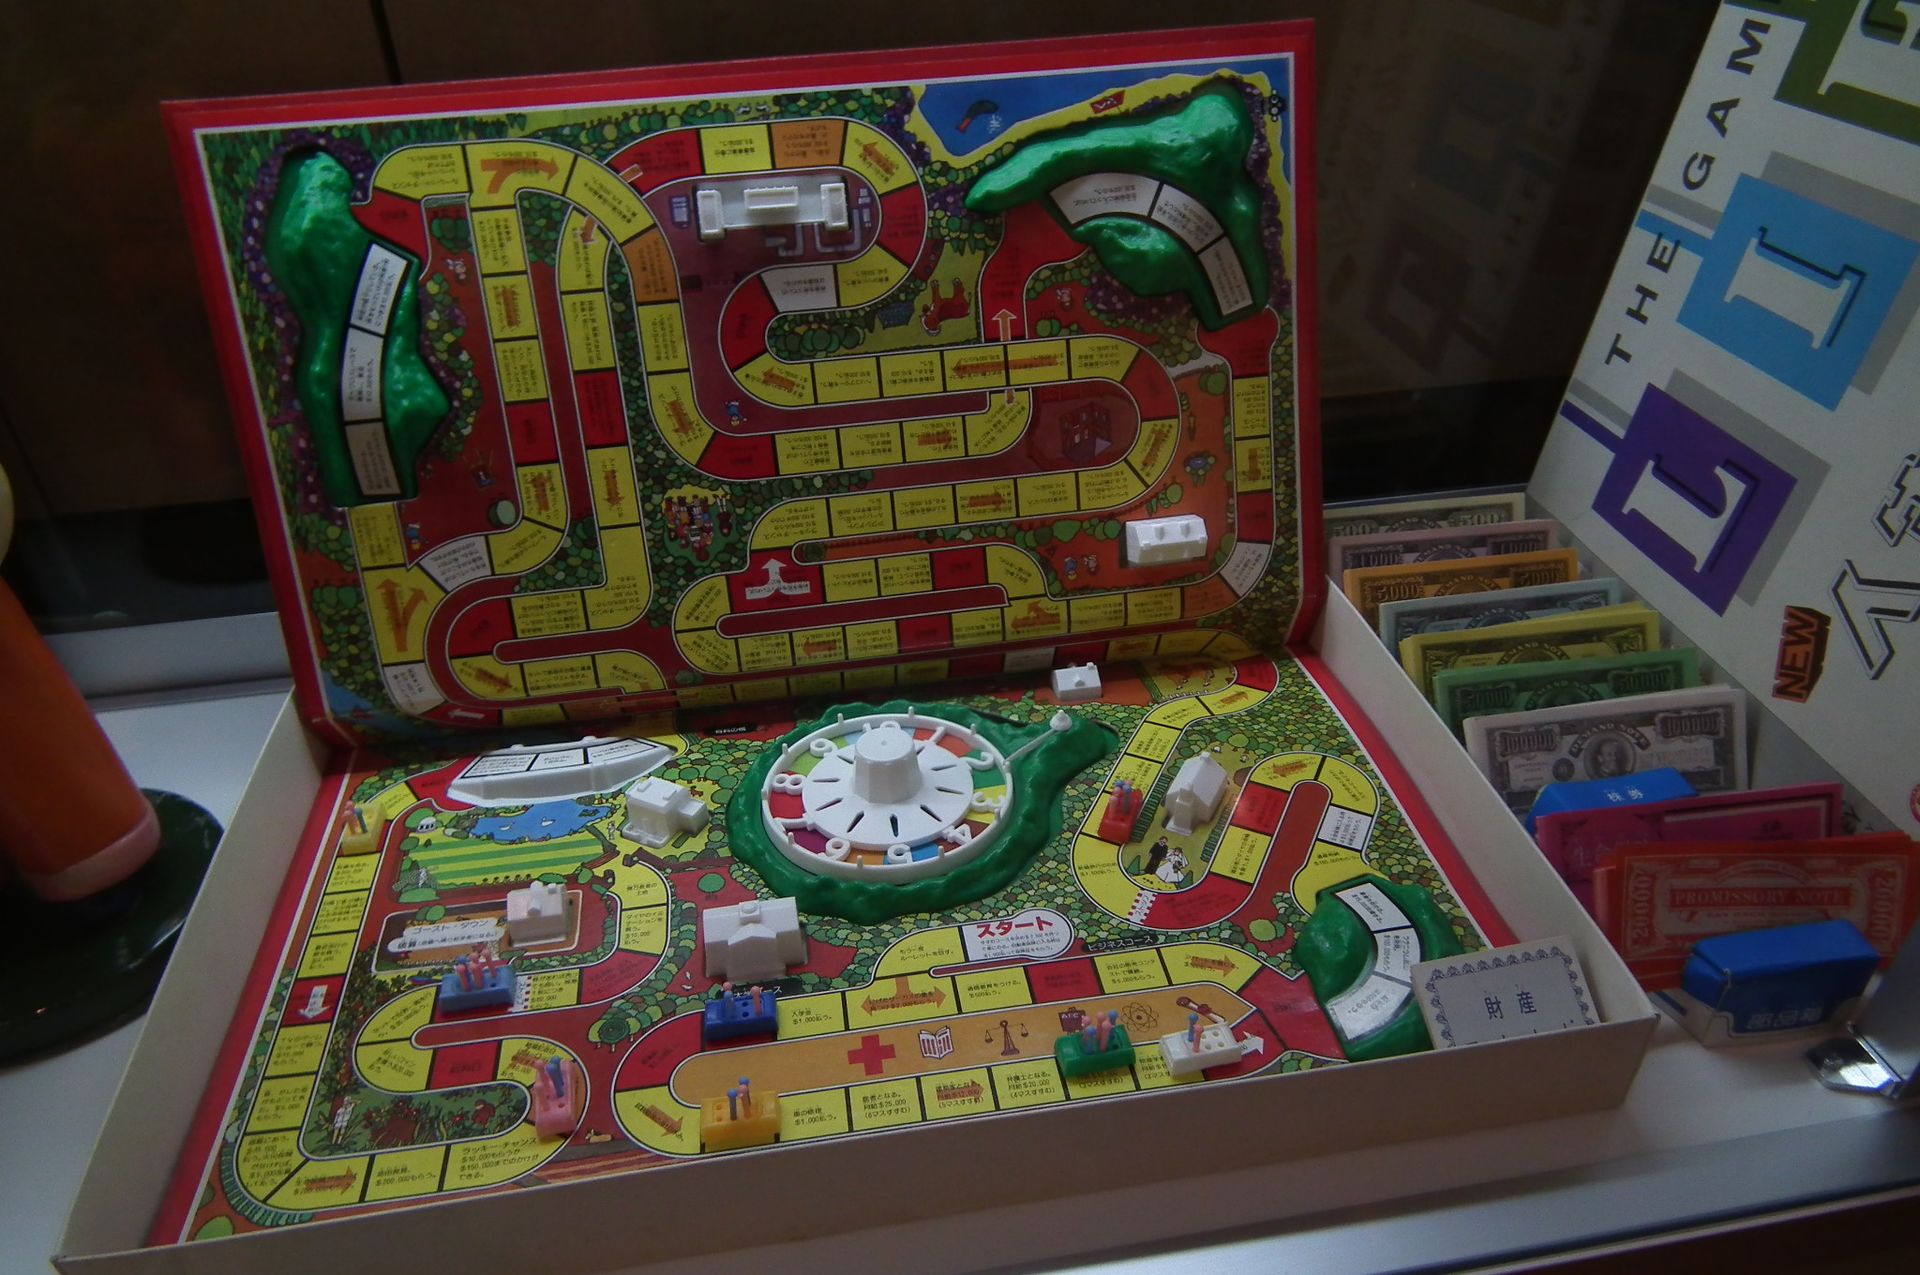 the Game of Life board game